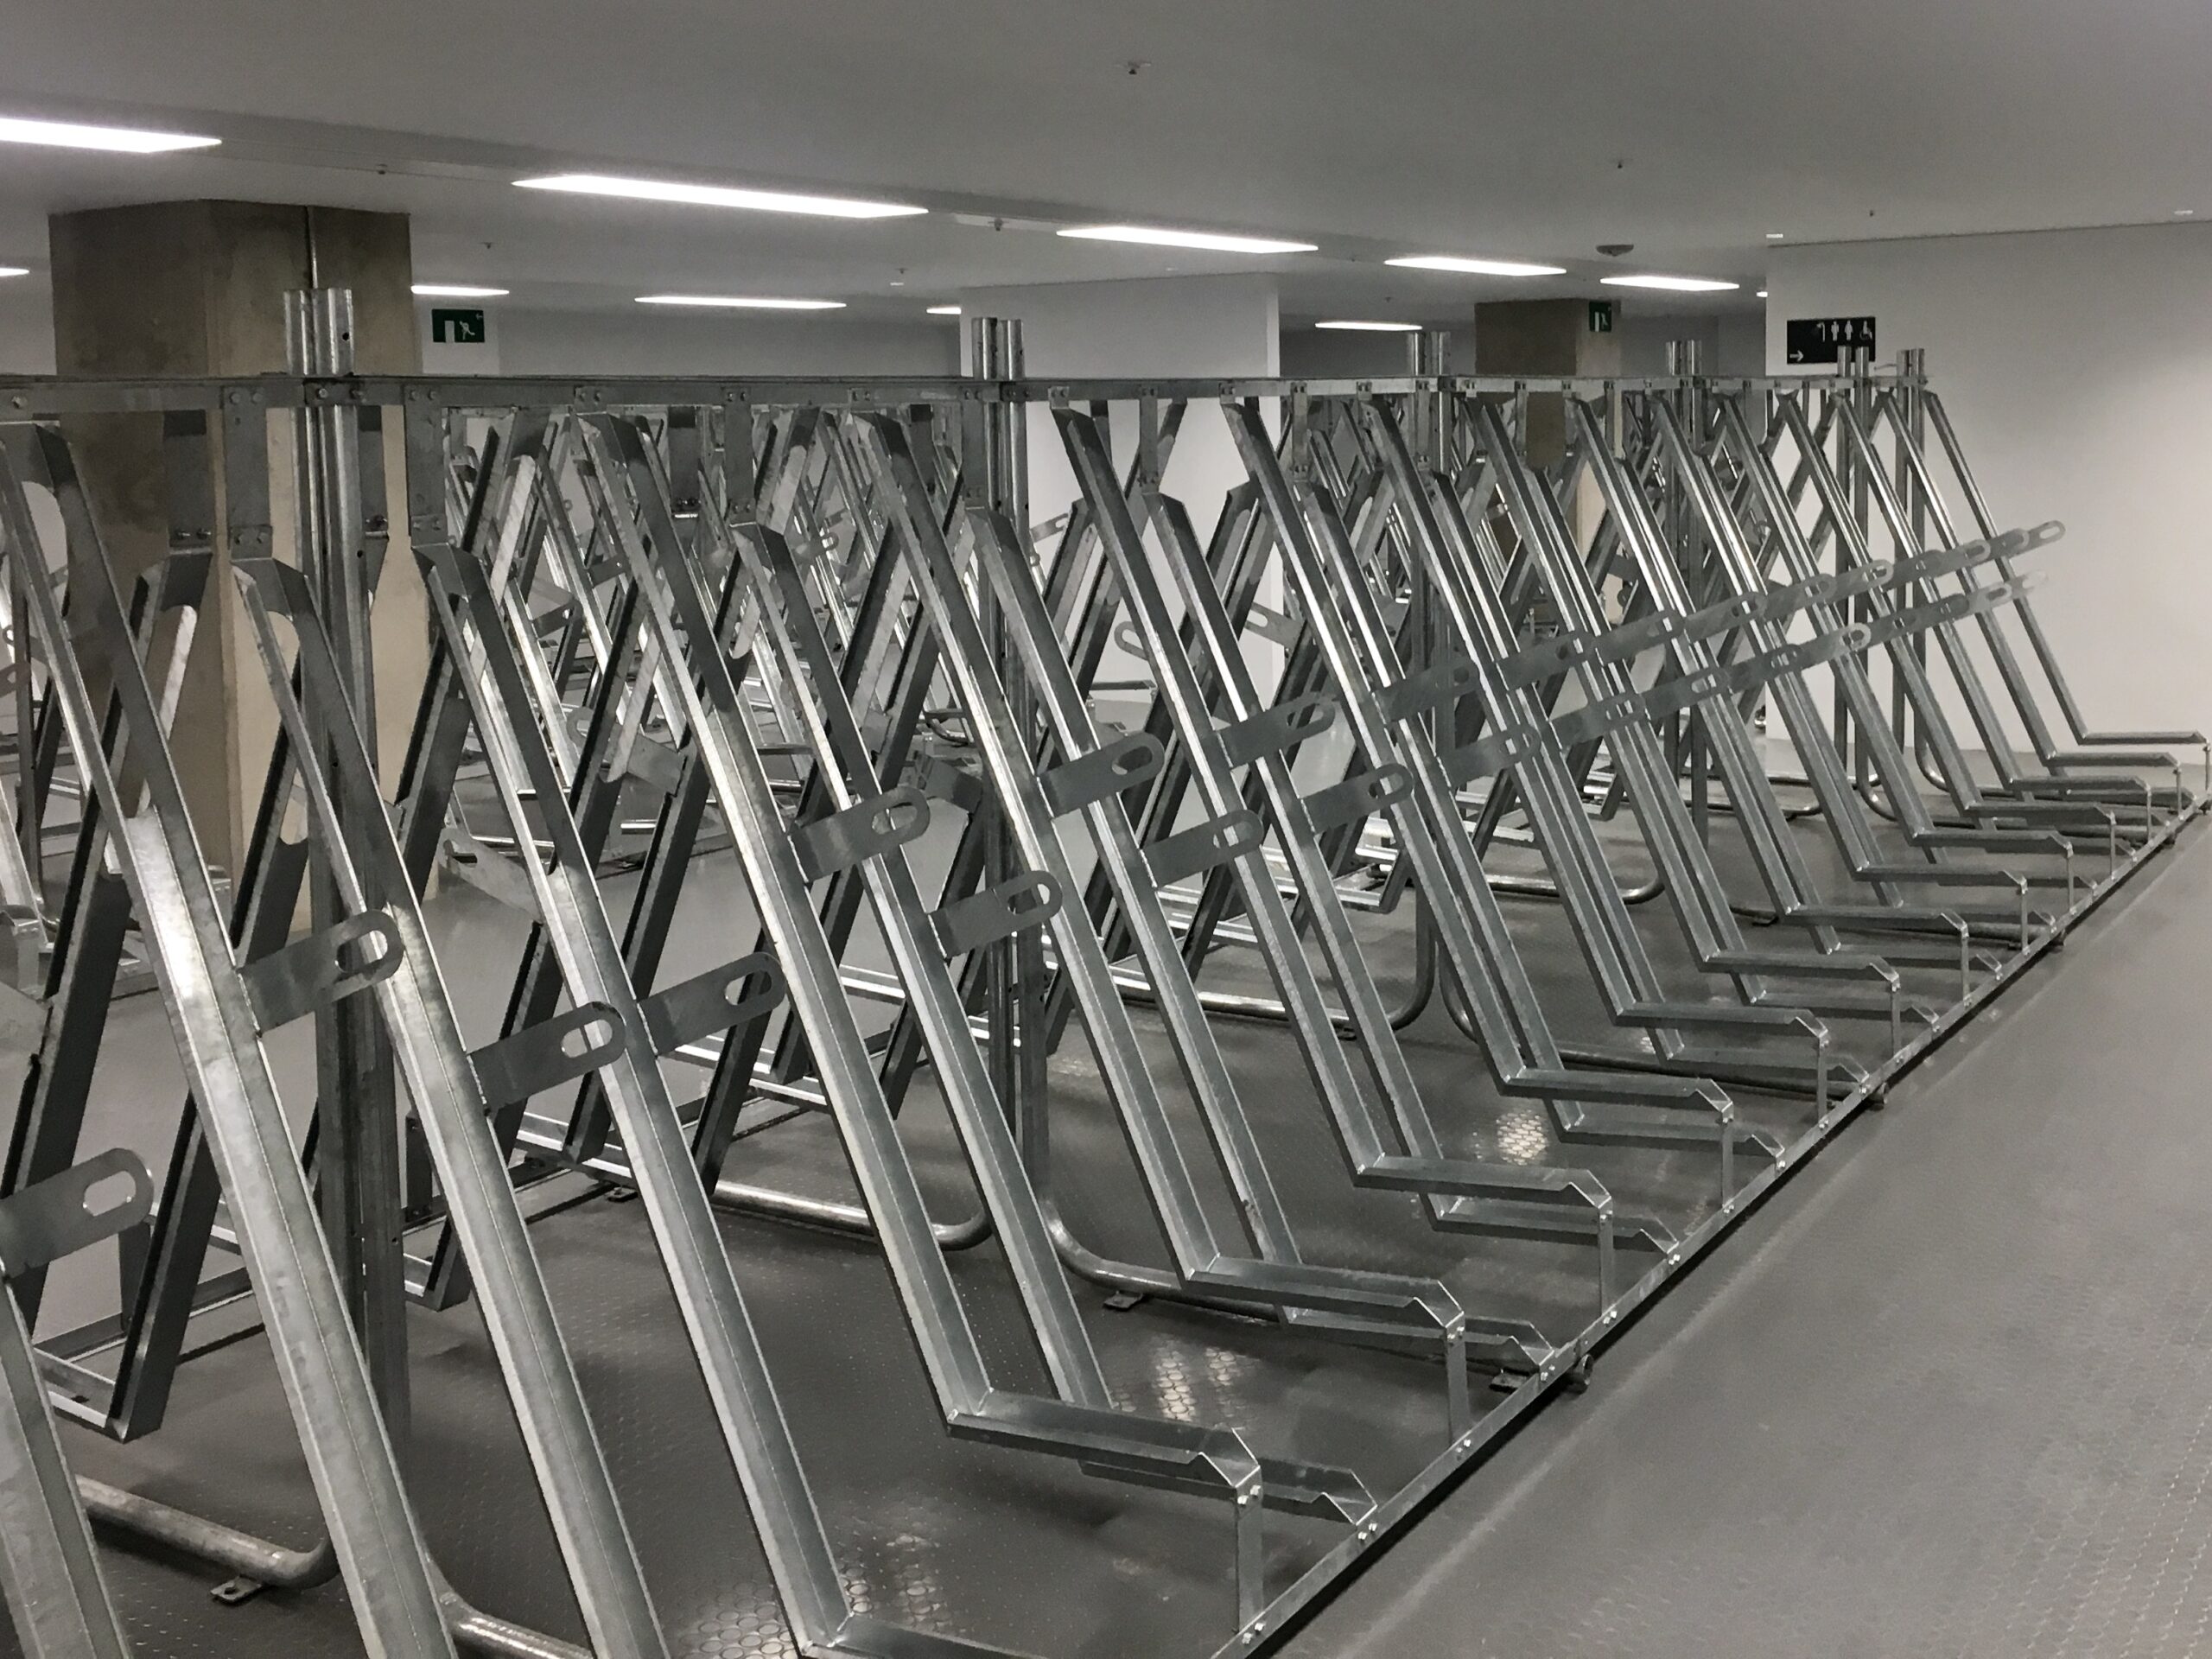 semi vertical cycle rack stored at commercial building indoors